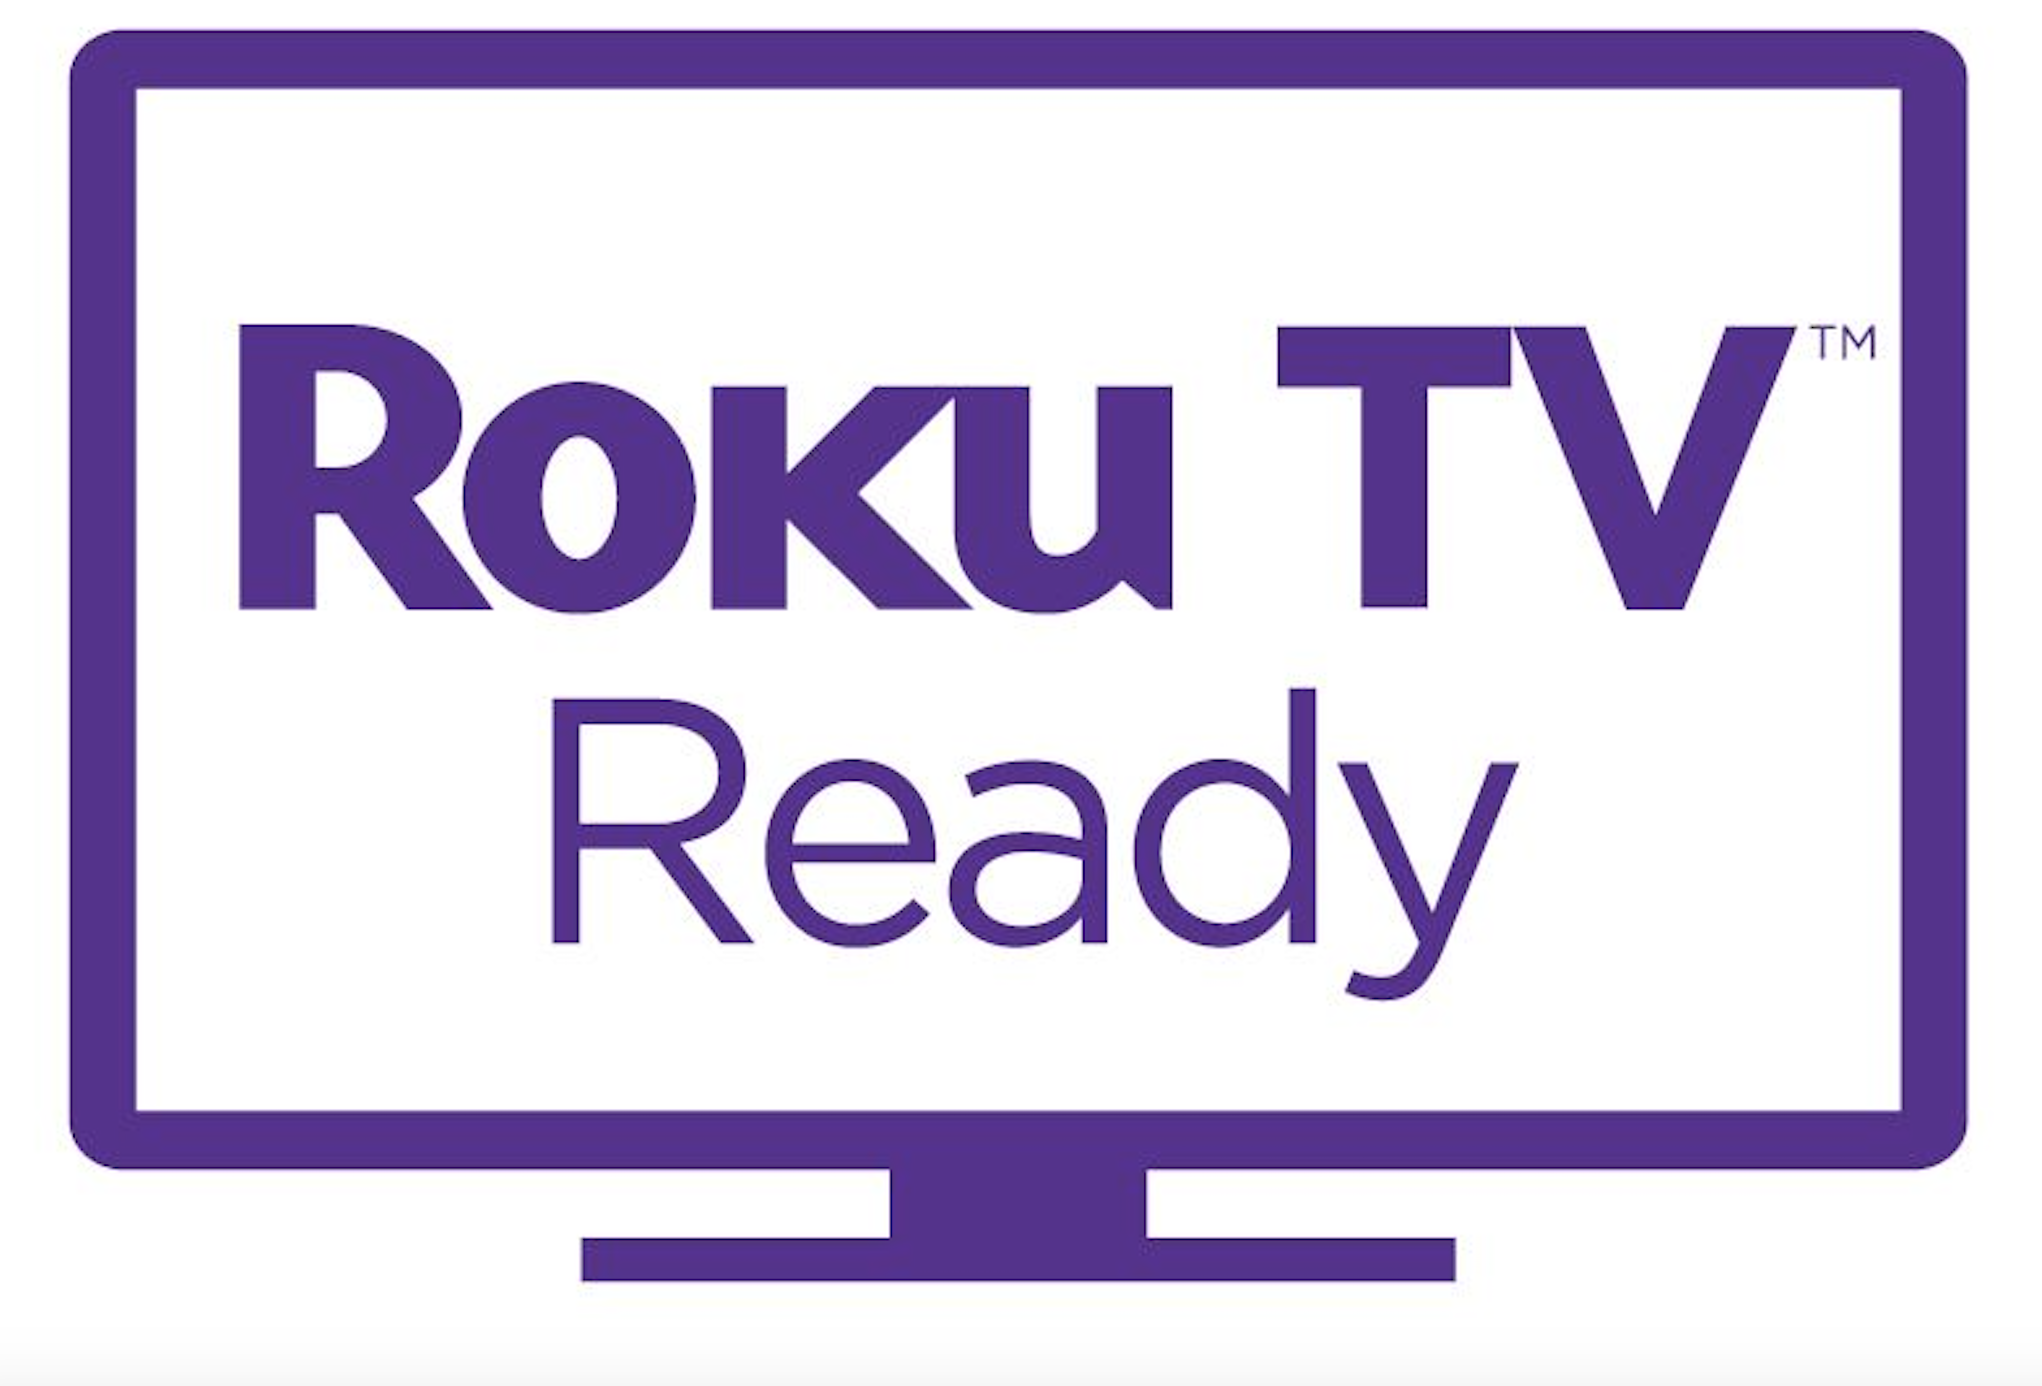 Roku Launches Roku TV Ready Program for Seamless Product Integration